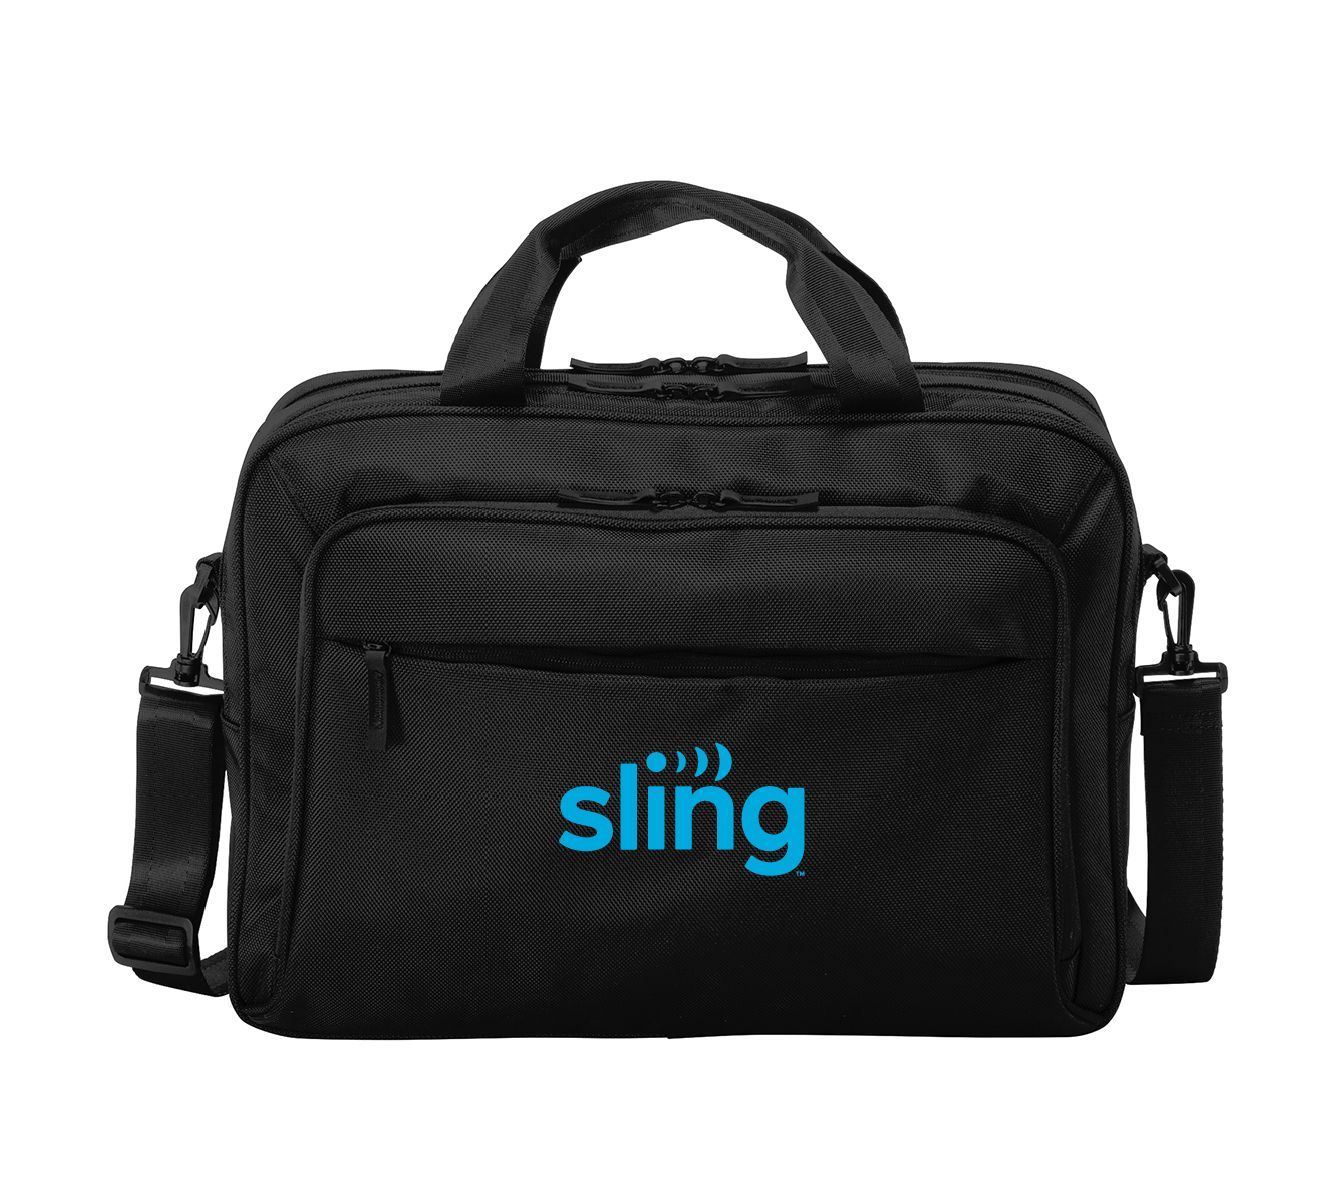 Exec Briefcase with Sling Logo